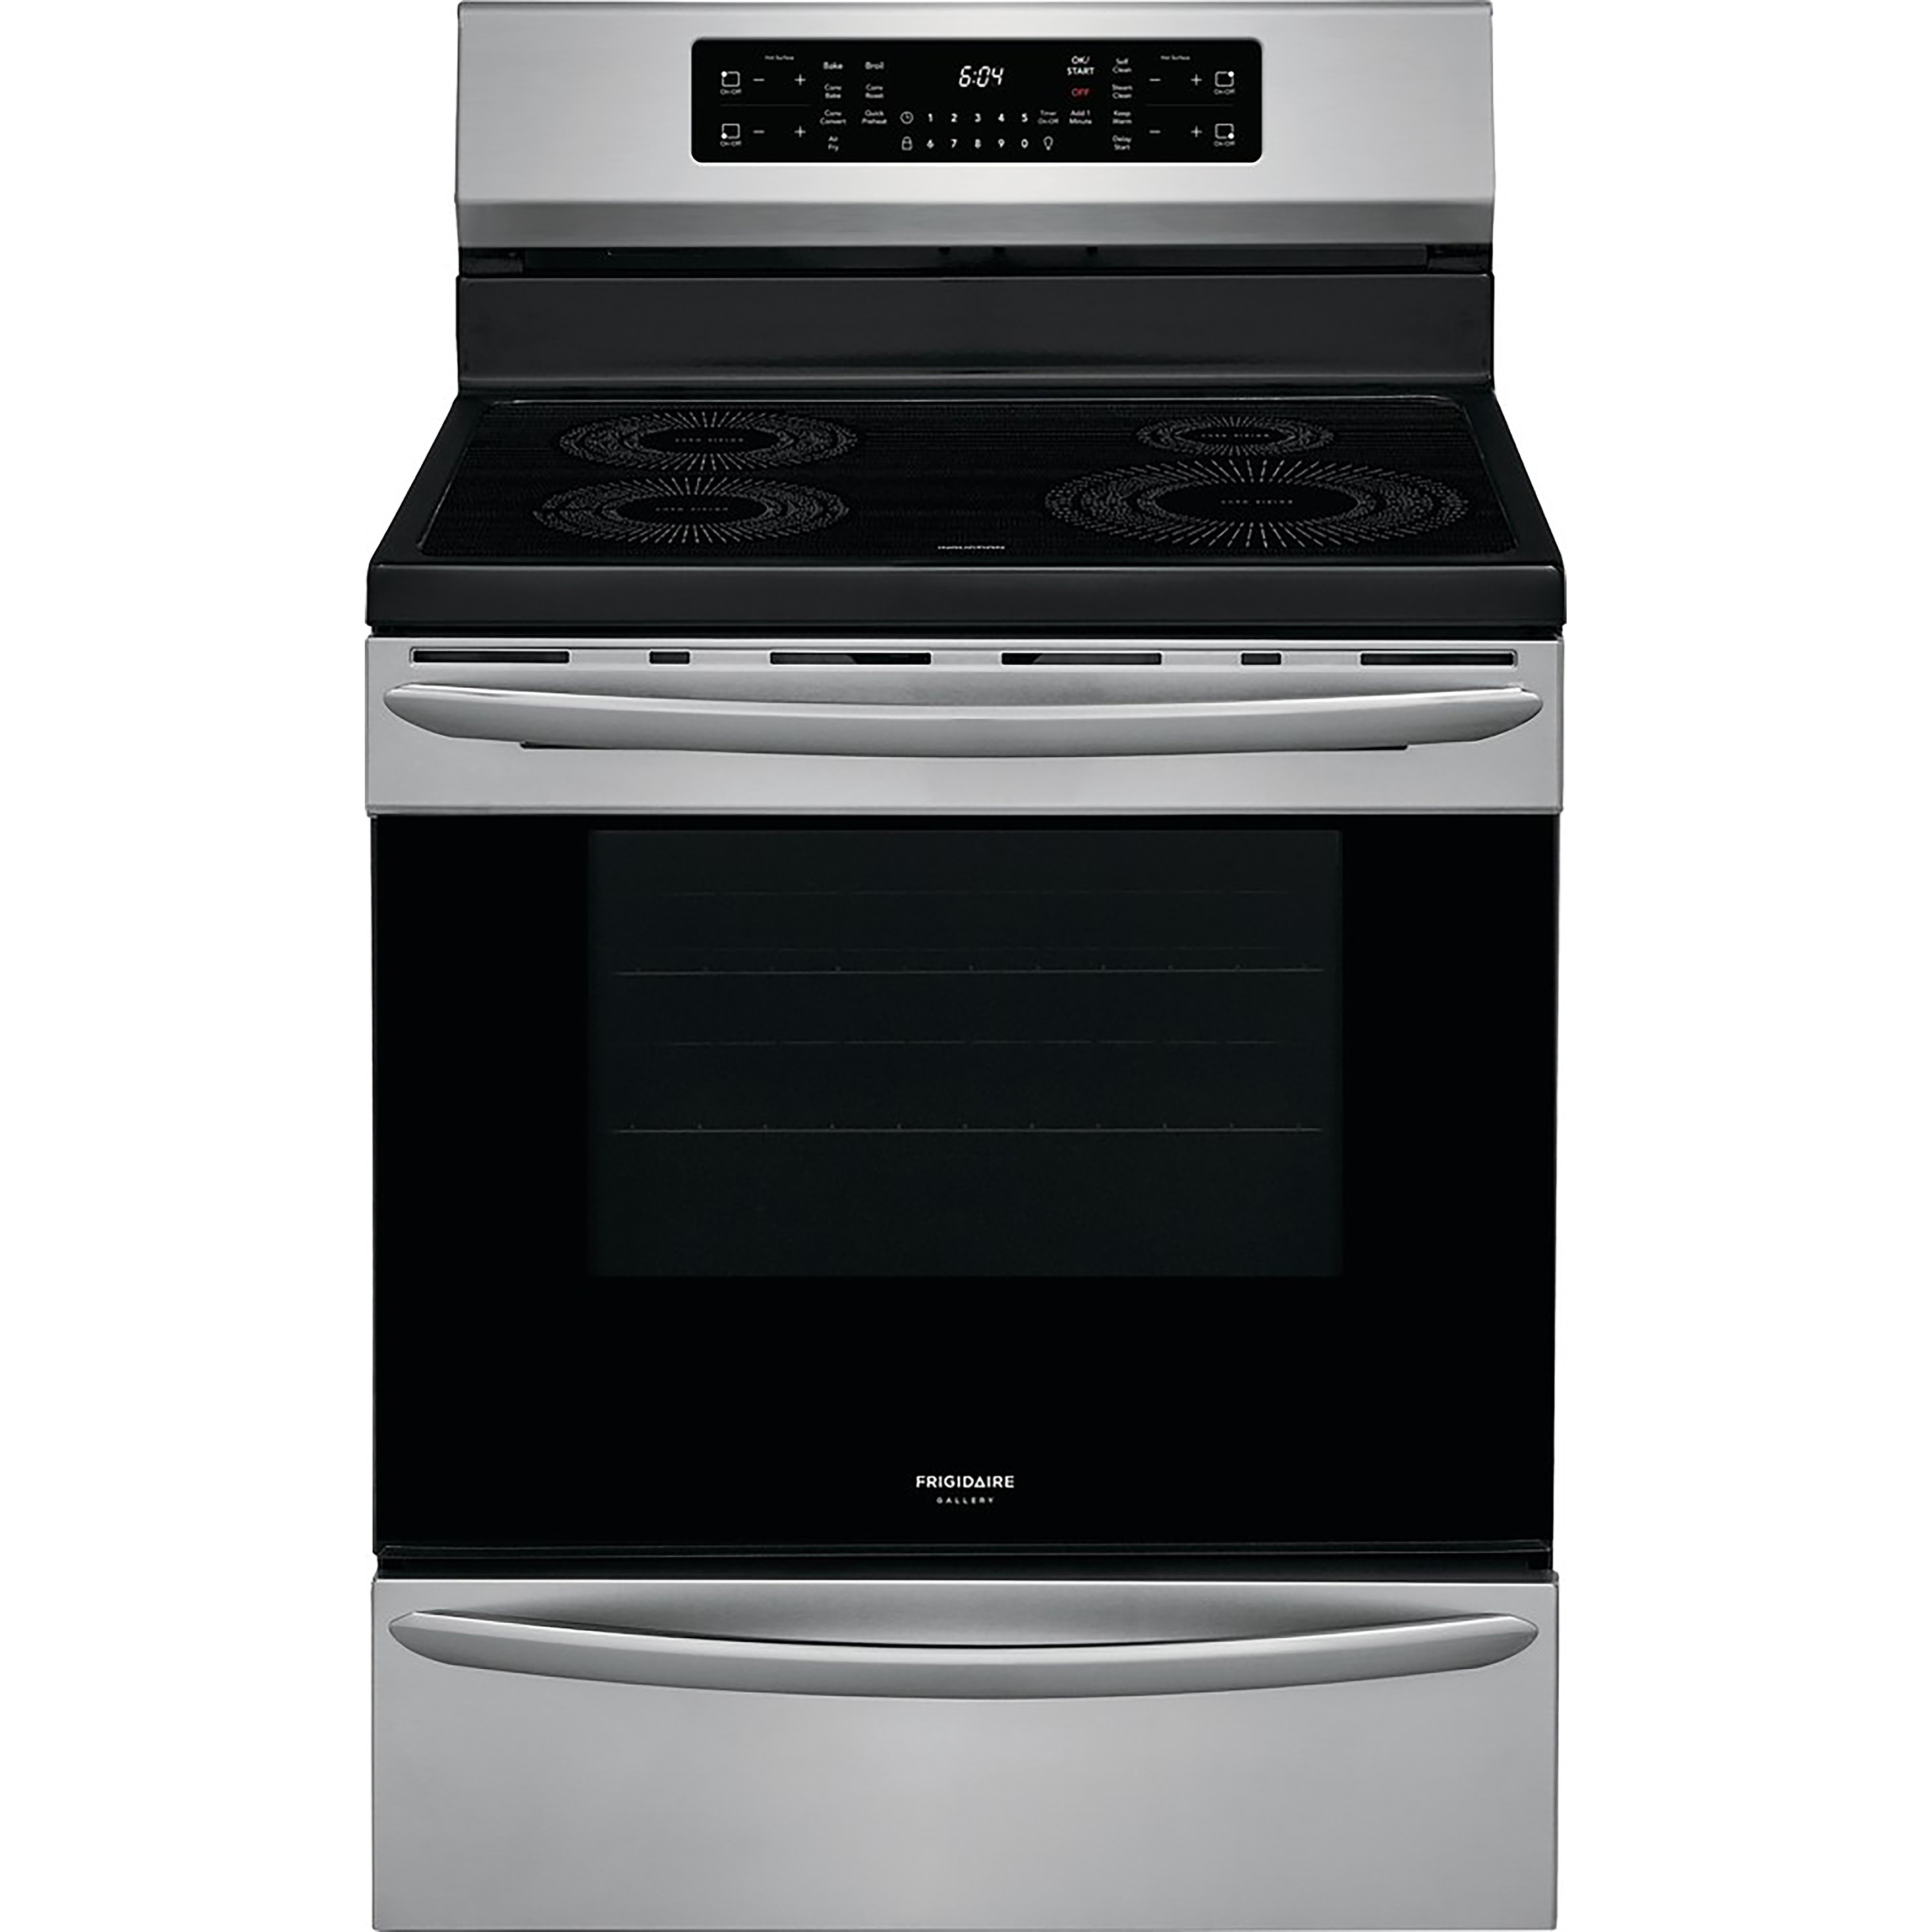 Frigidaire GCRI3058AF 30 inch Freestanding Induction Range with Air Fry - Stainless Steel